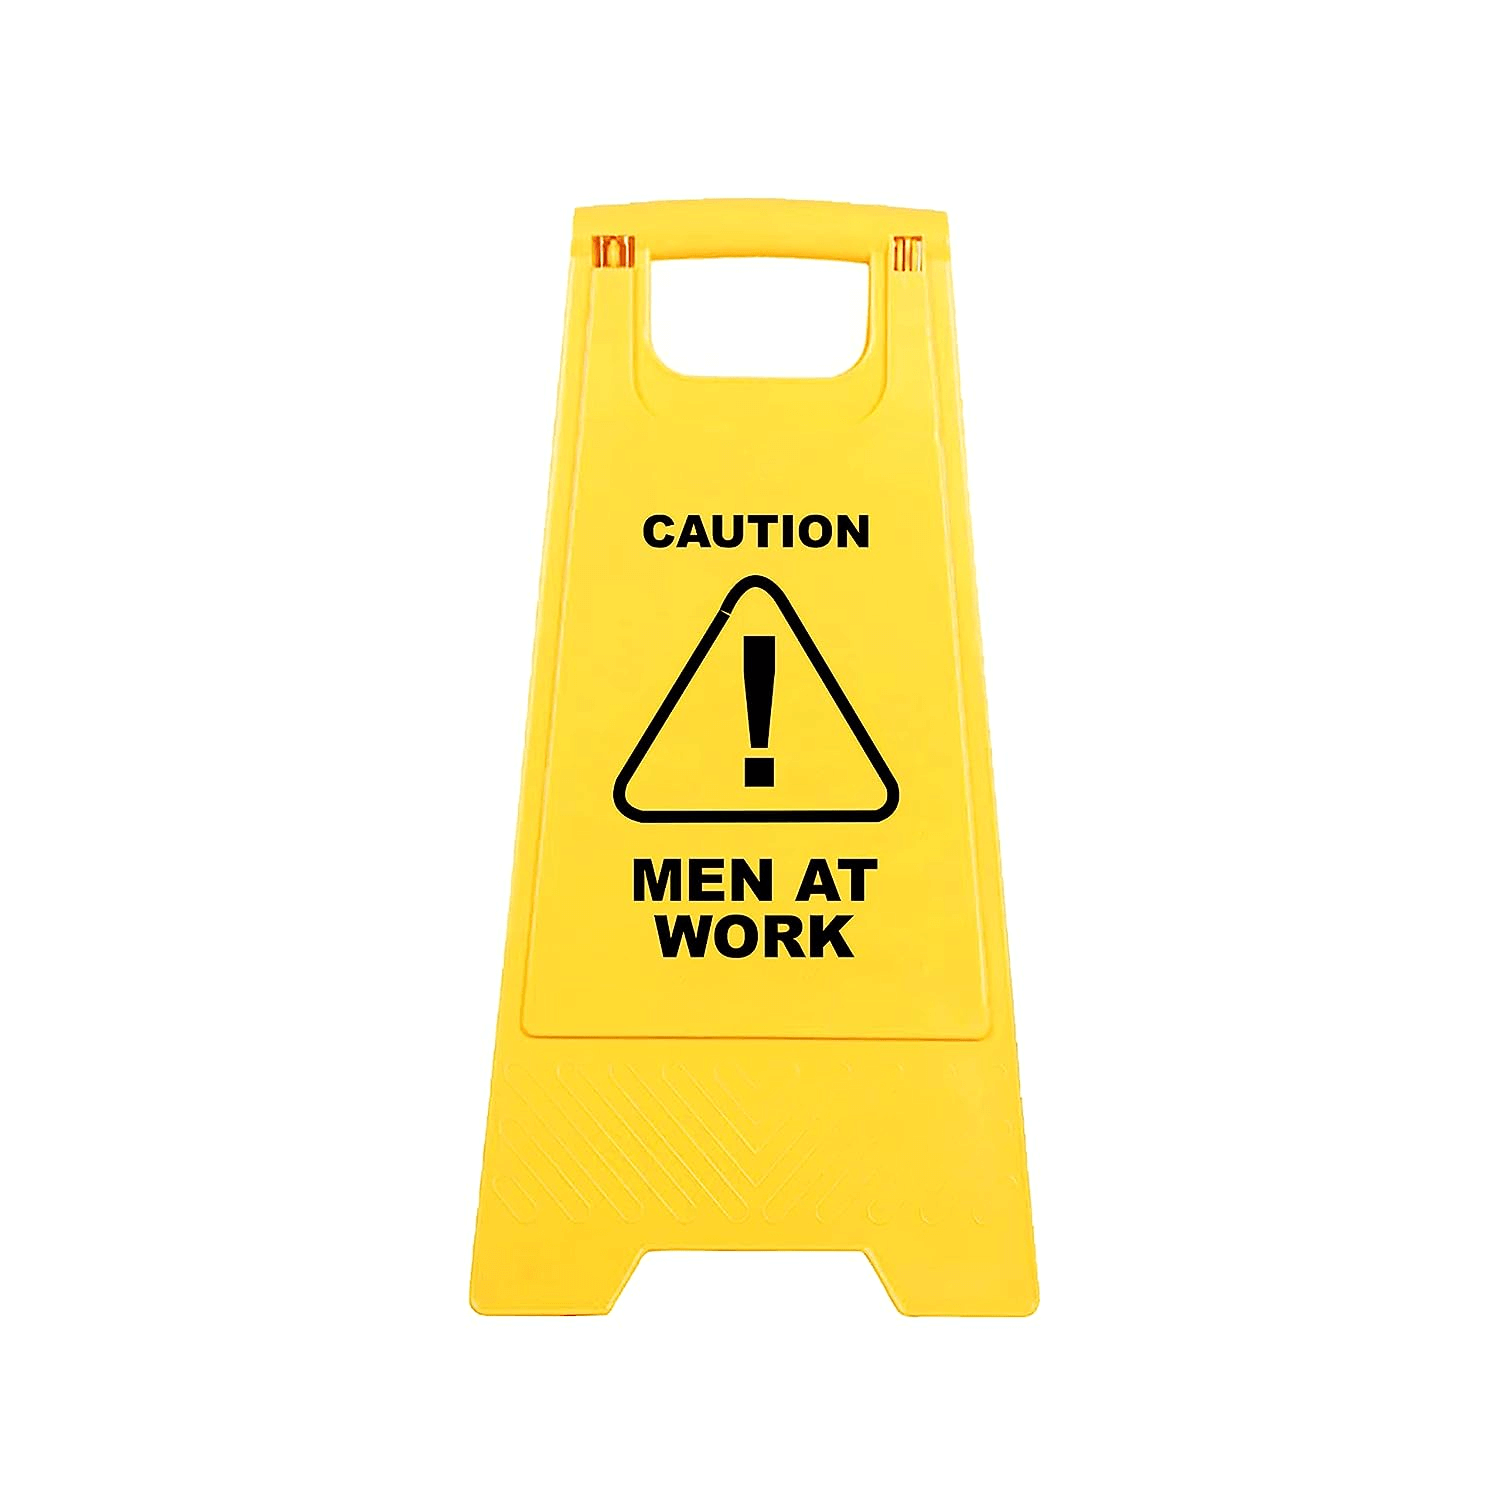 robustt-pp-material-caution-men-at-work-sign-board-uv-resistant-size-62-x-30-cm-two-side-floor-sign-board-pack-of-5